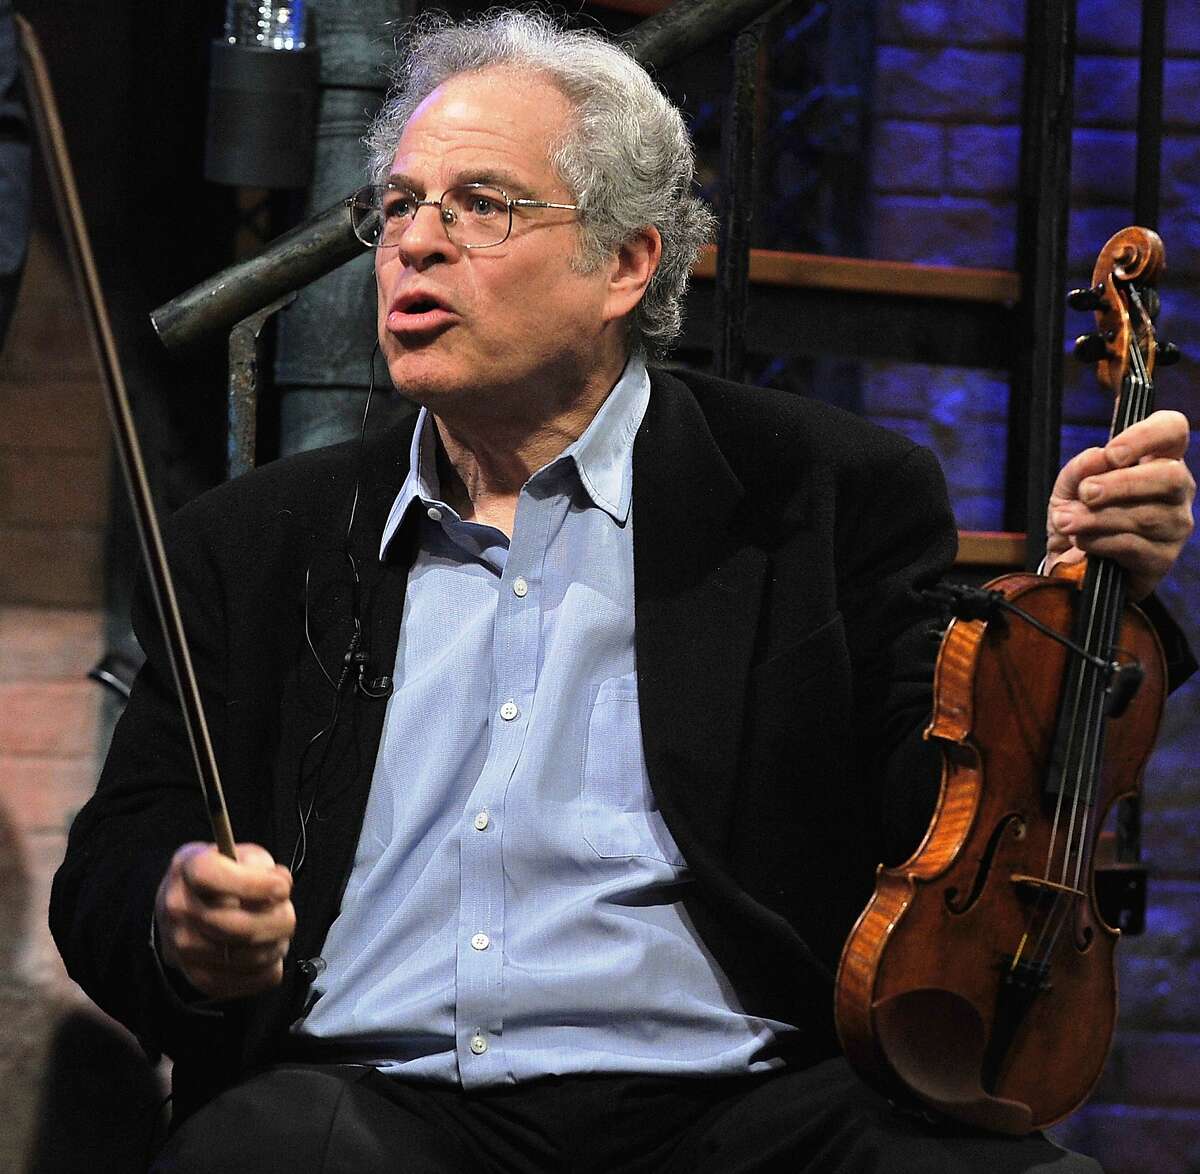 Violinist Itzhak Perlman visits "Late Night with Jimmy Fallon" at Rockefeller Center on February 25, 2011 in New York City.